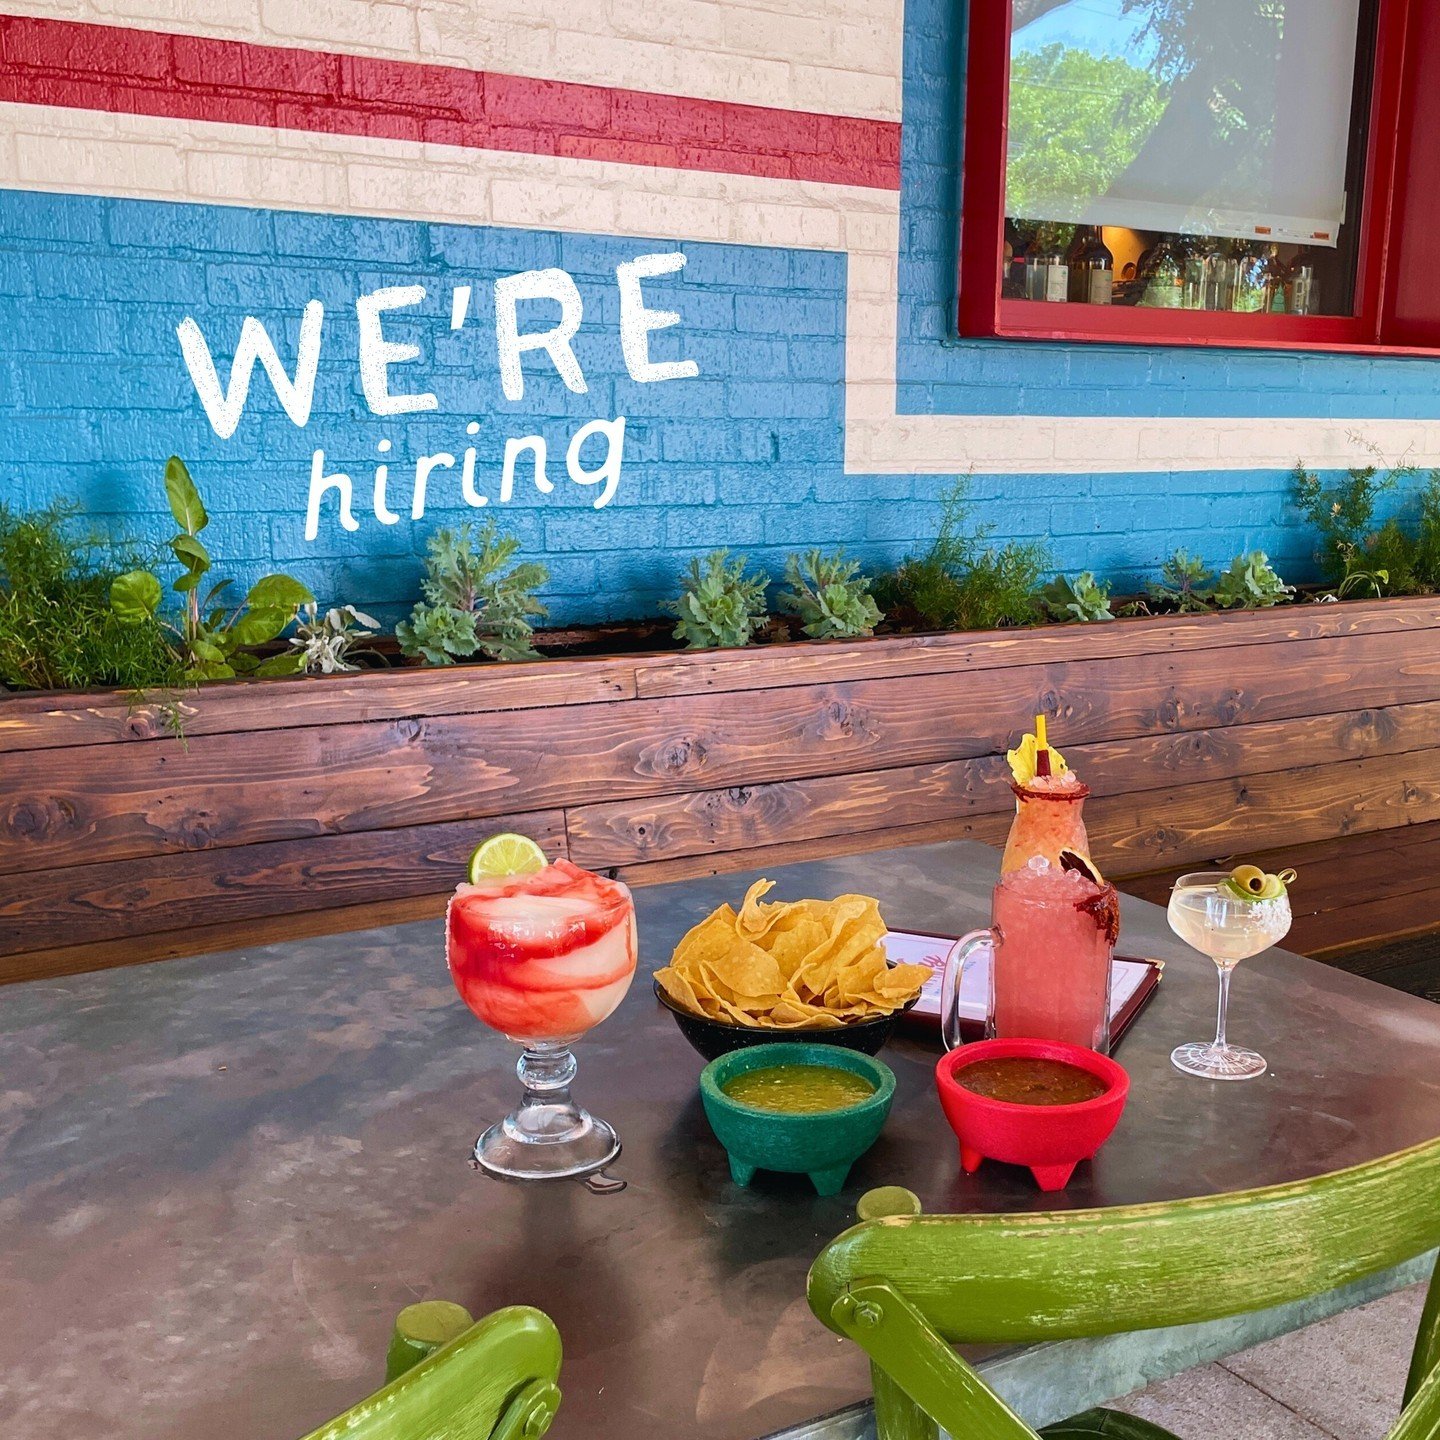 We're looking to add a full-time bartender to our team. Know someone who'd be a good fit? Tag them below and pass it on! ⁠
⁠
To apply, visit us in person or send your resume to info@hiwaycantina.com and someone from our team will be in touch.